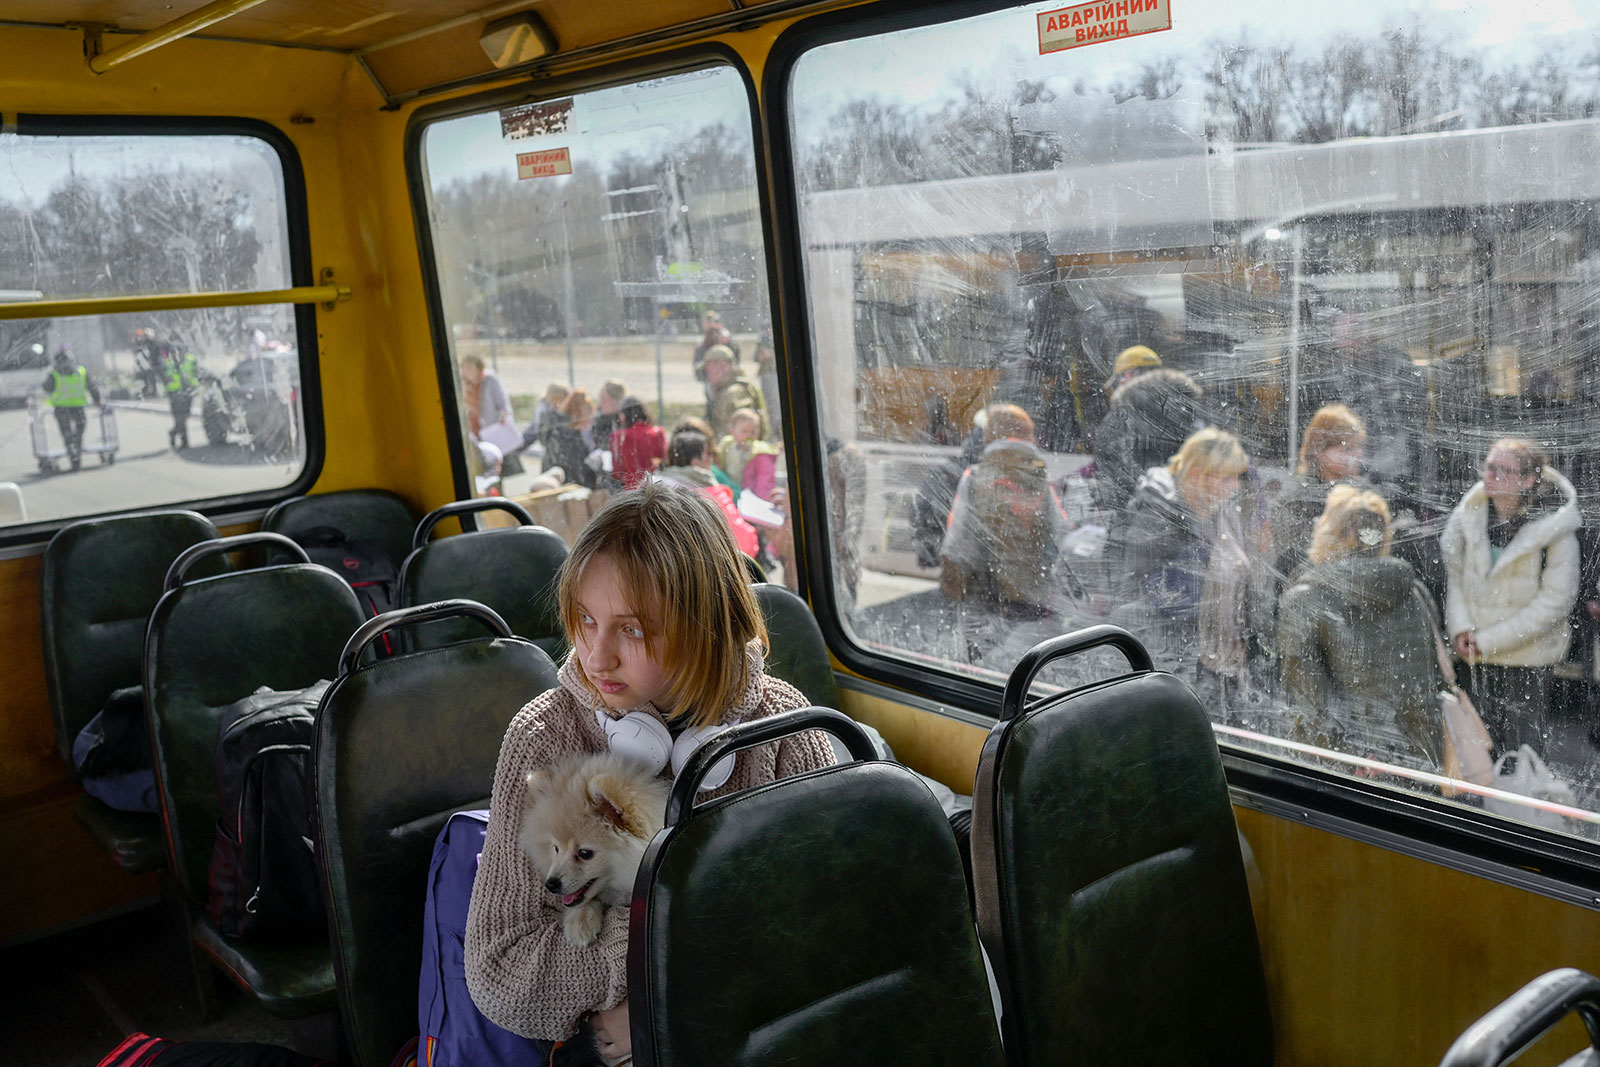 A young girl with her dog arrives at a center for internally displaced people in Zaporizhzhia on Wednesday.